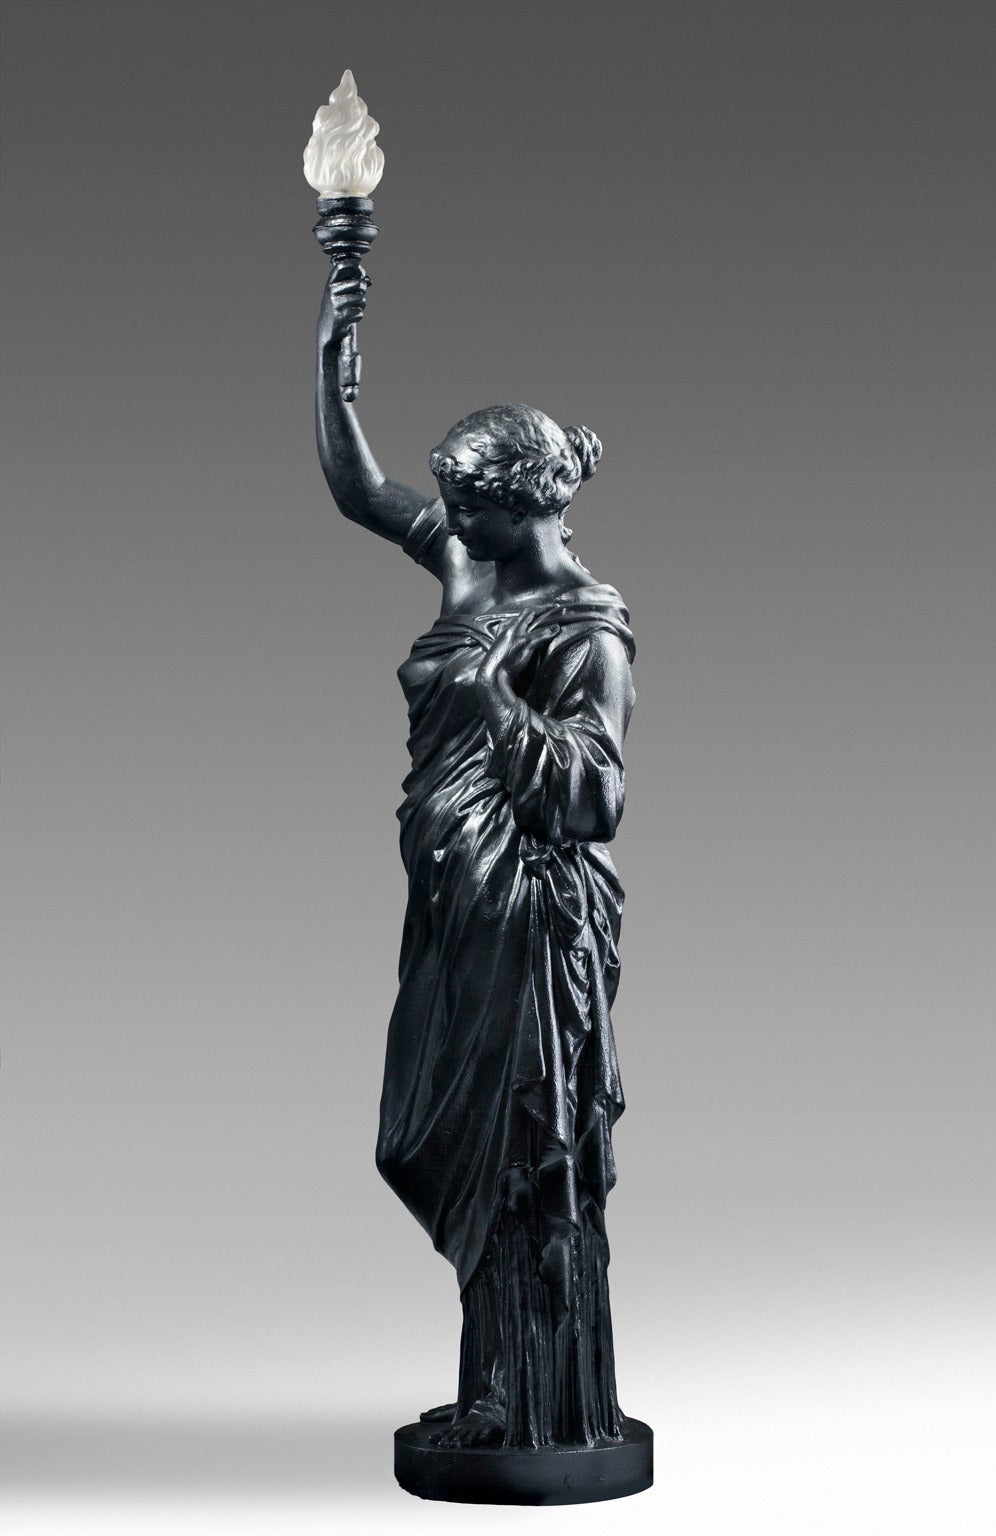 Stamped Tusey Meuse,' the maiden portrayed as standing and draped in the classical manner, the torchere held aloft in her raised right hand.

Pierre-Adolphe Muel established a foundry at Tusey in the Meuse district between 1832 and 1835, gaining